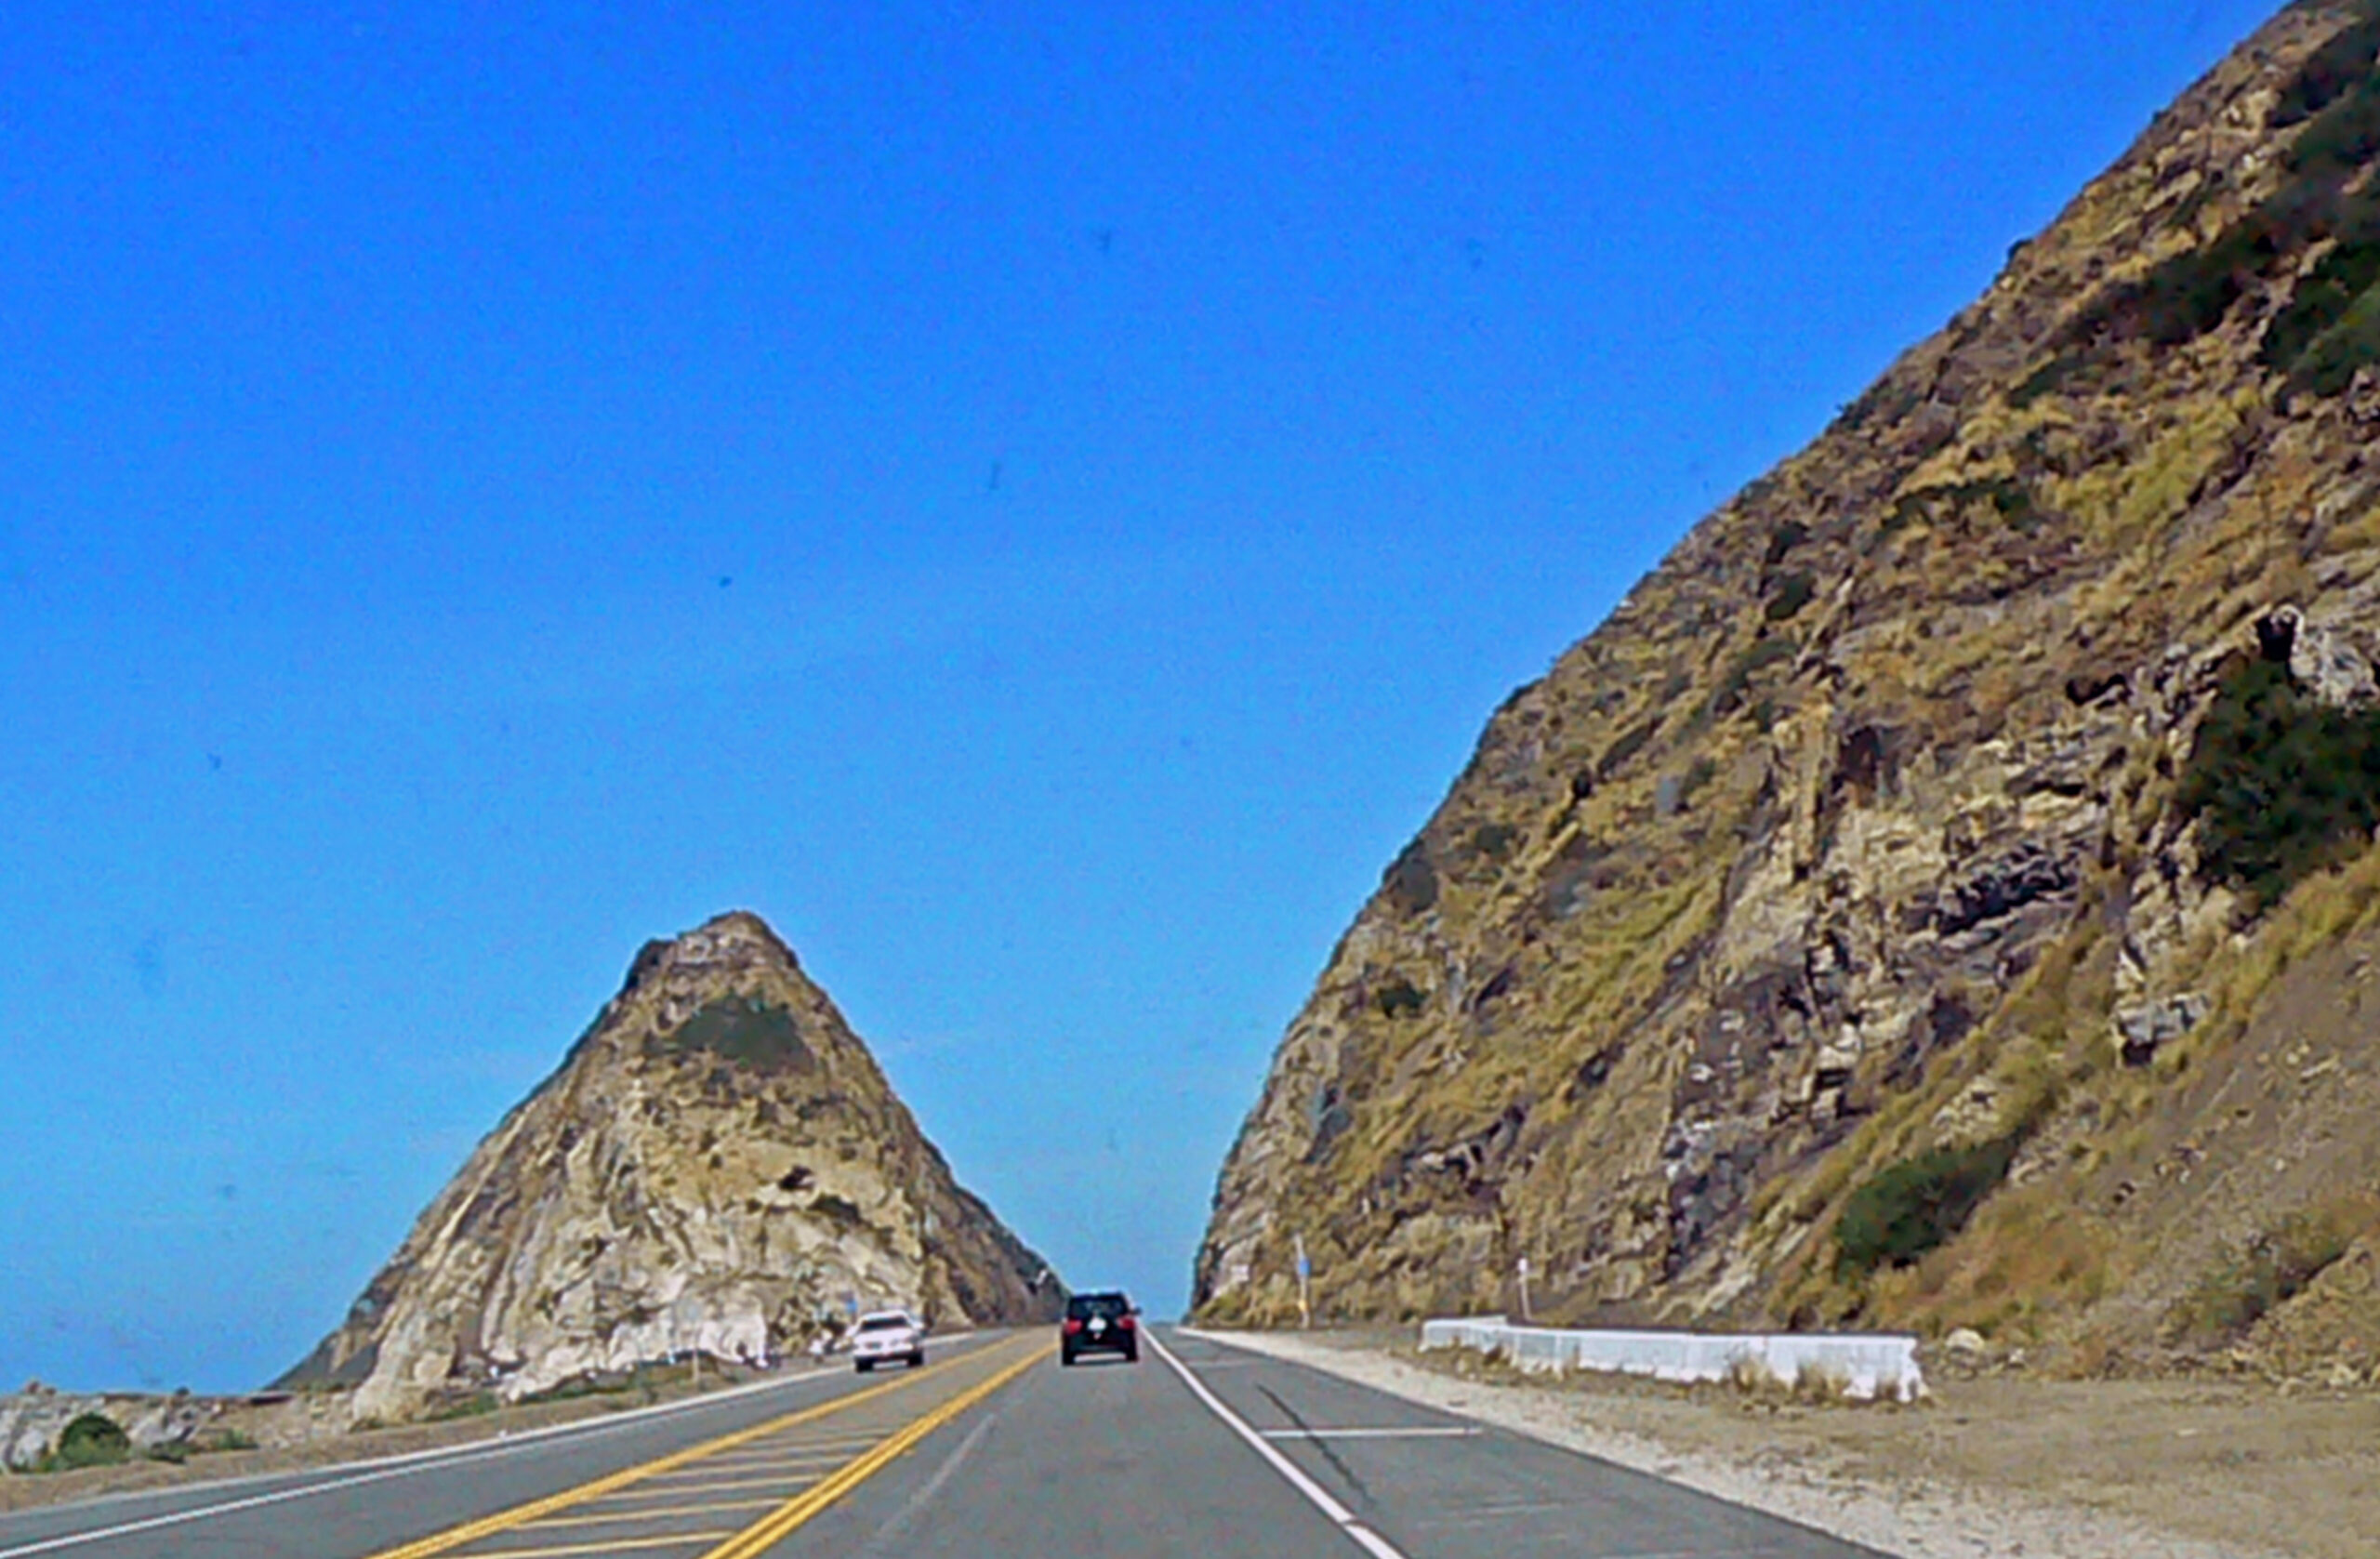 May 27 and 28, the Pacific Coast Highway will be closed intermittently from 6 a.m. to 8 p.m. for rock-slide prevention work